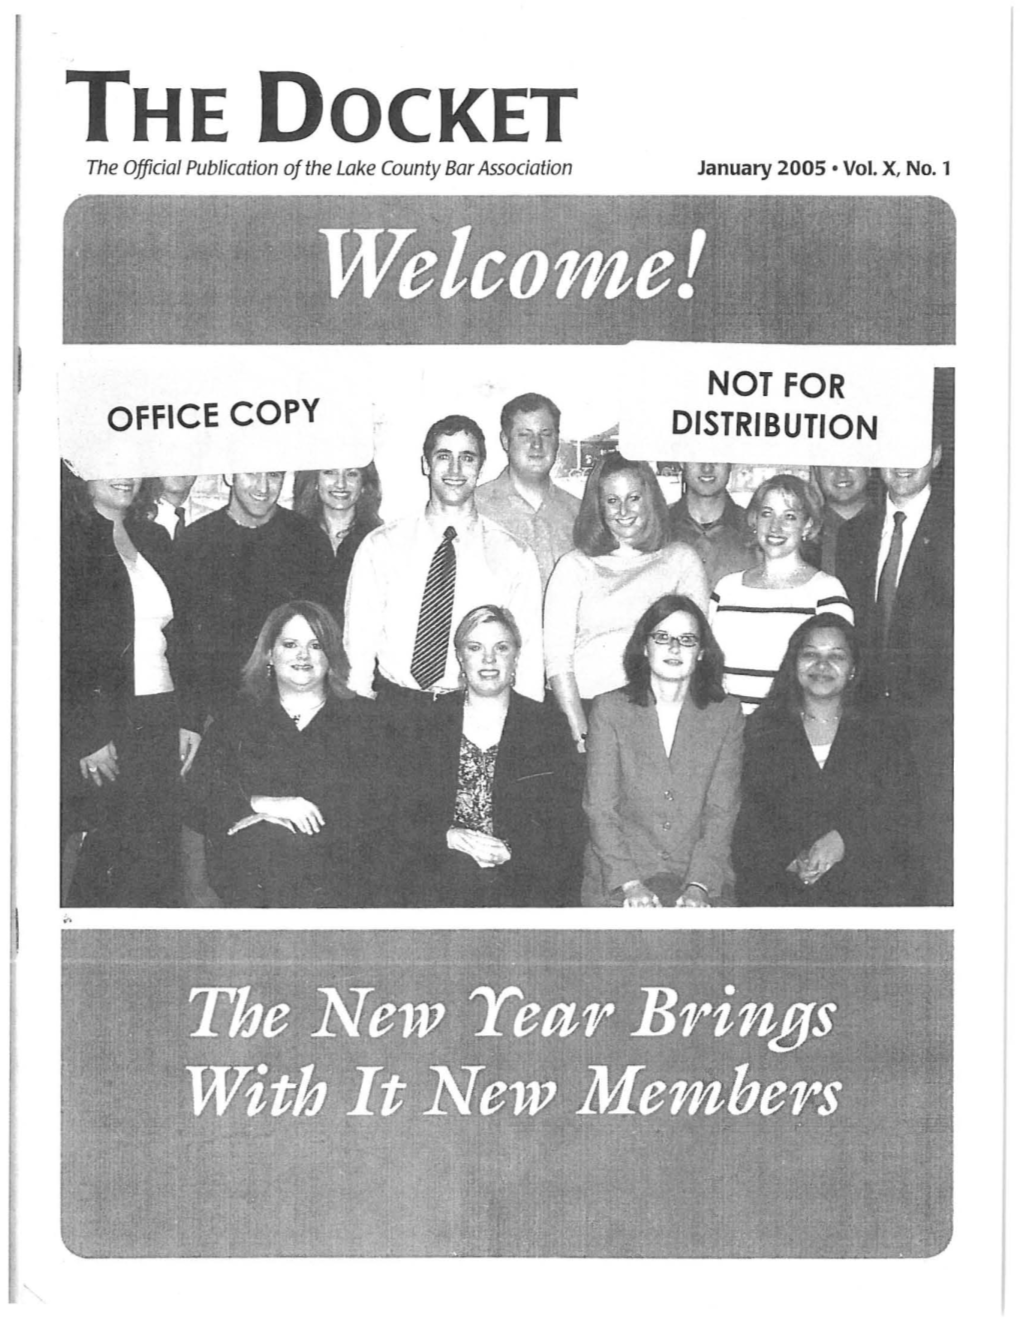 THE DOCKET the Official Publication of the Lake County Bar Association January 2005 • Vol